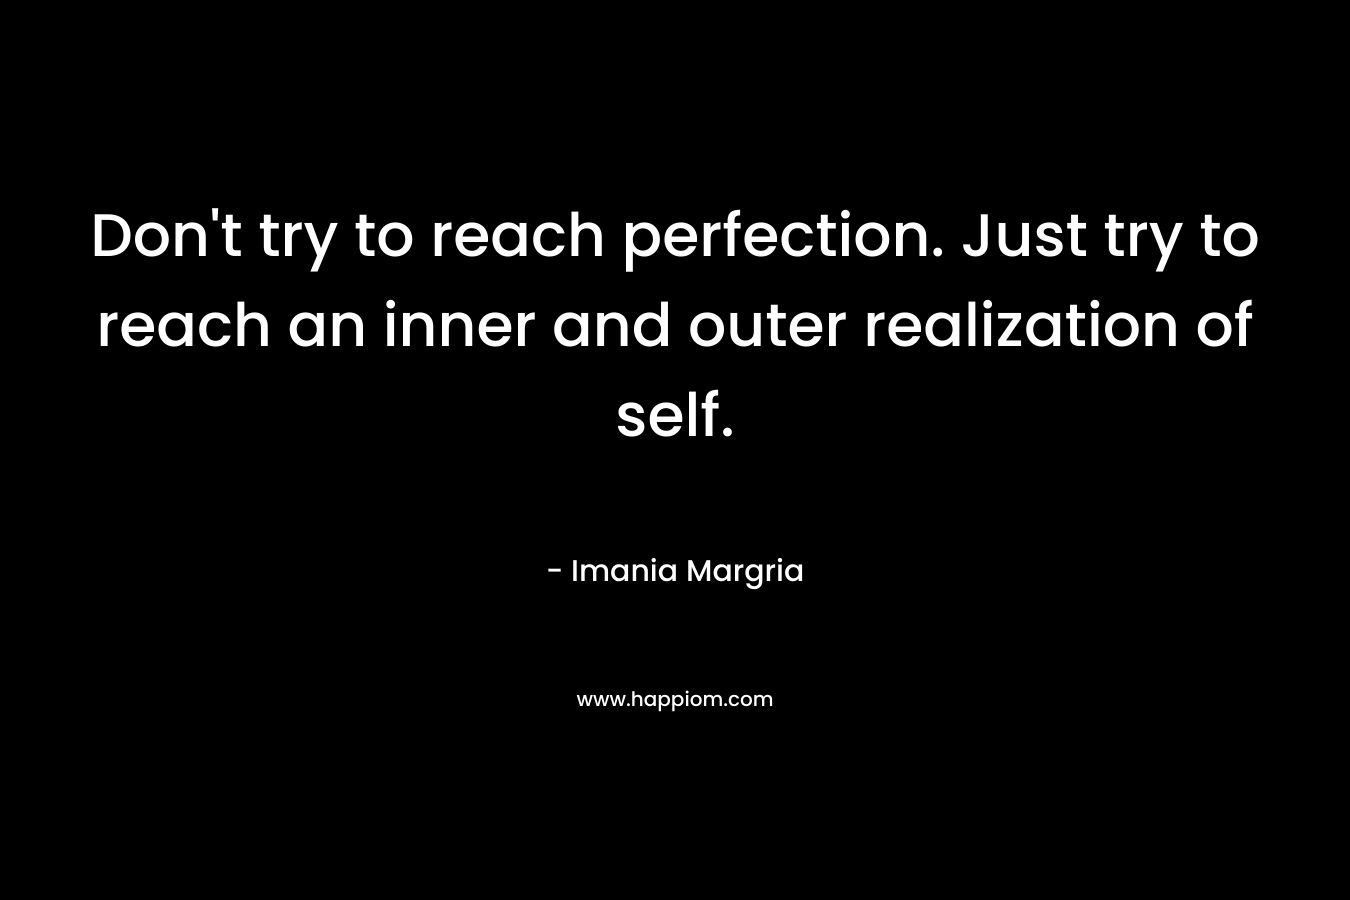 Don't try to reach perfection. Just try to reach an inner and outer realization of self.